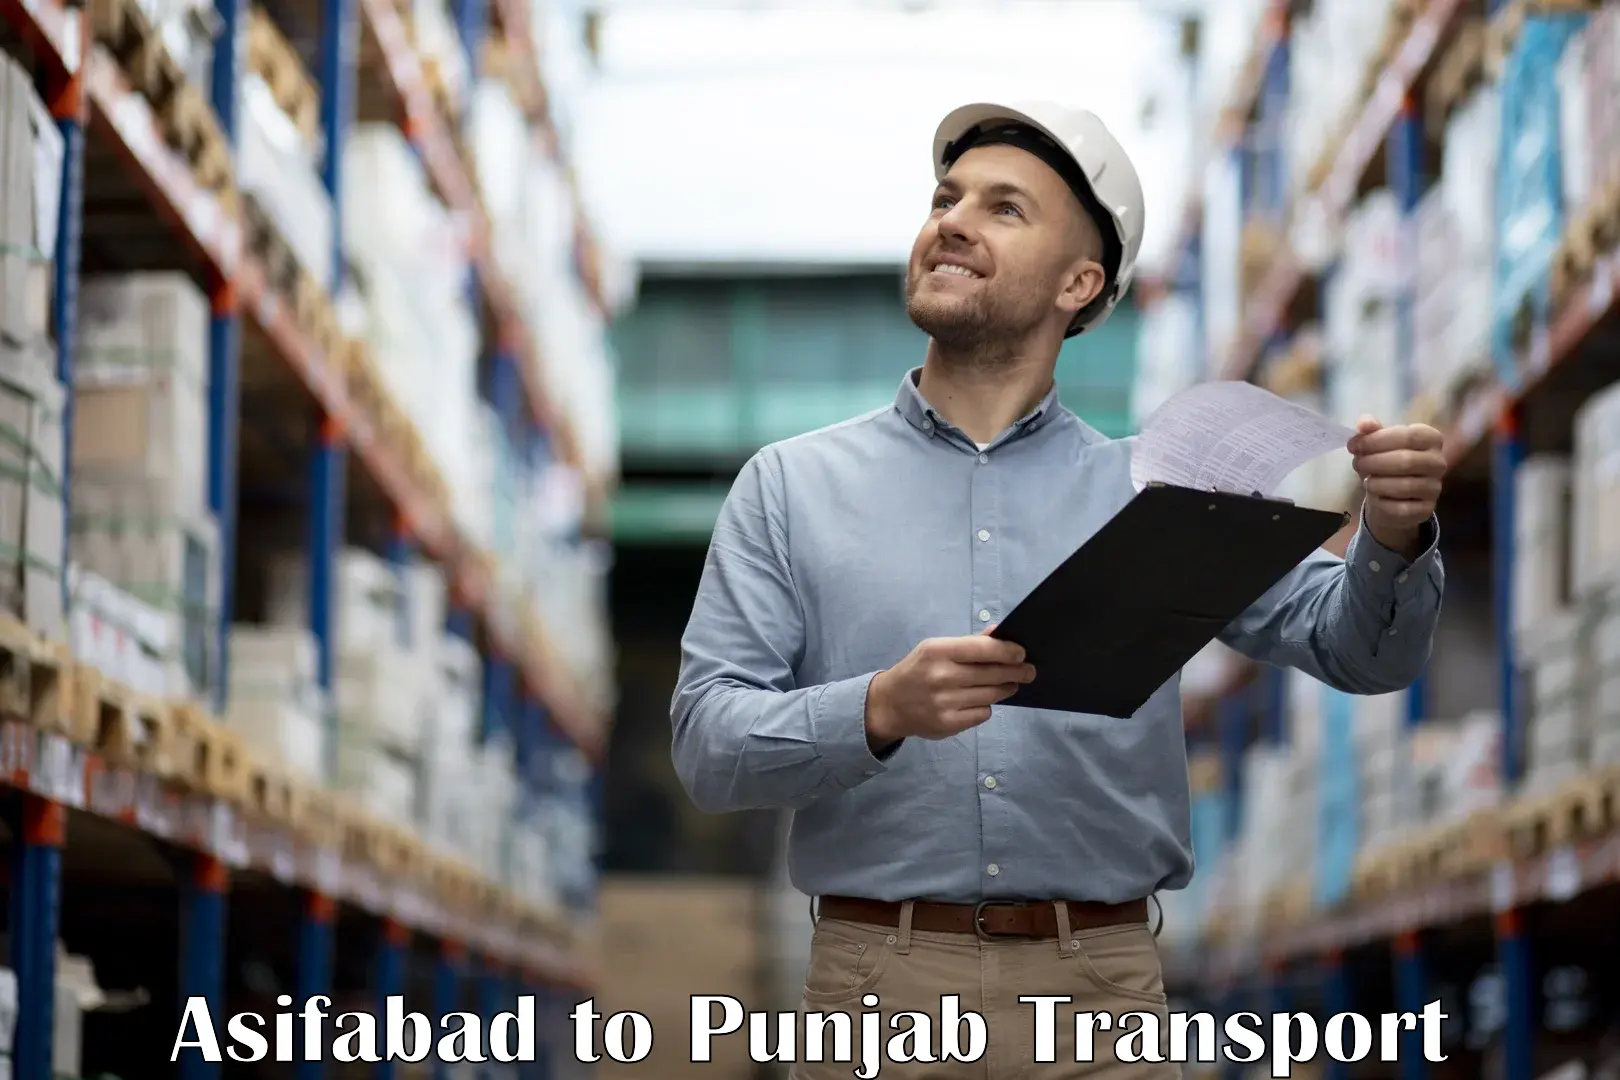 Goods delivery service Asifabad to Ludhiana